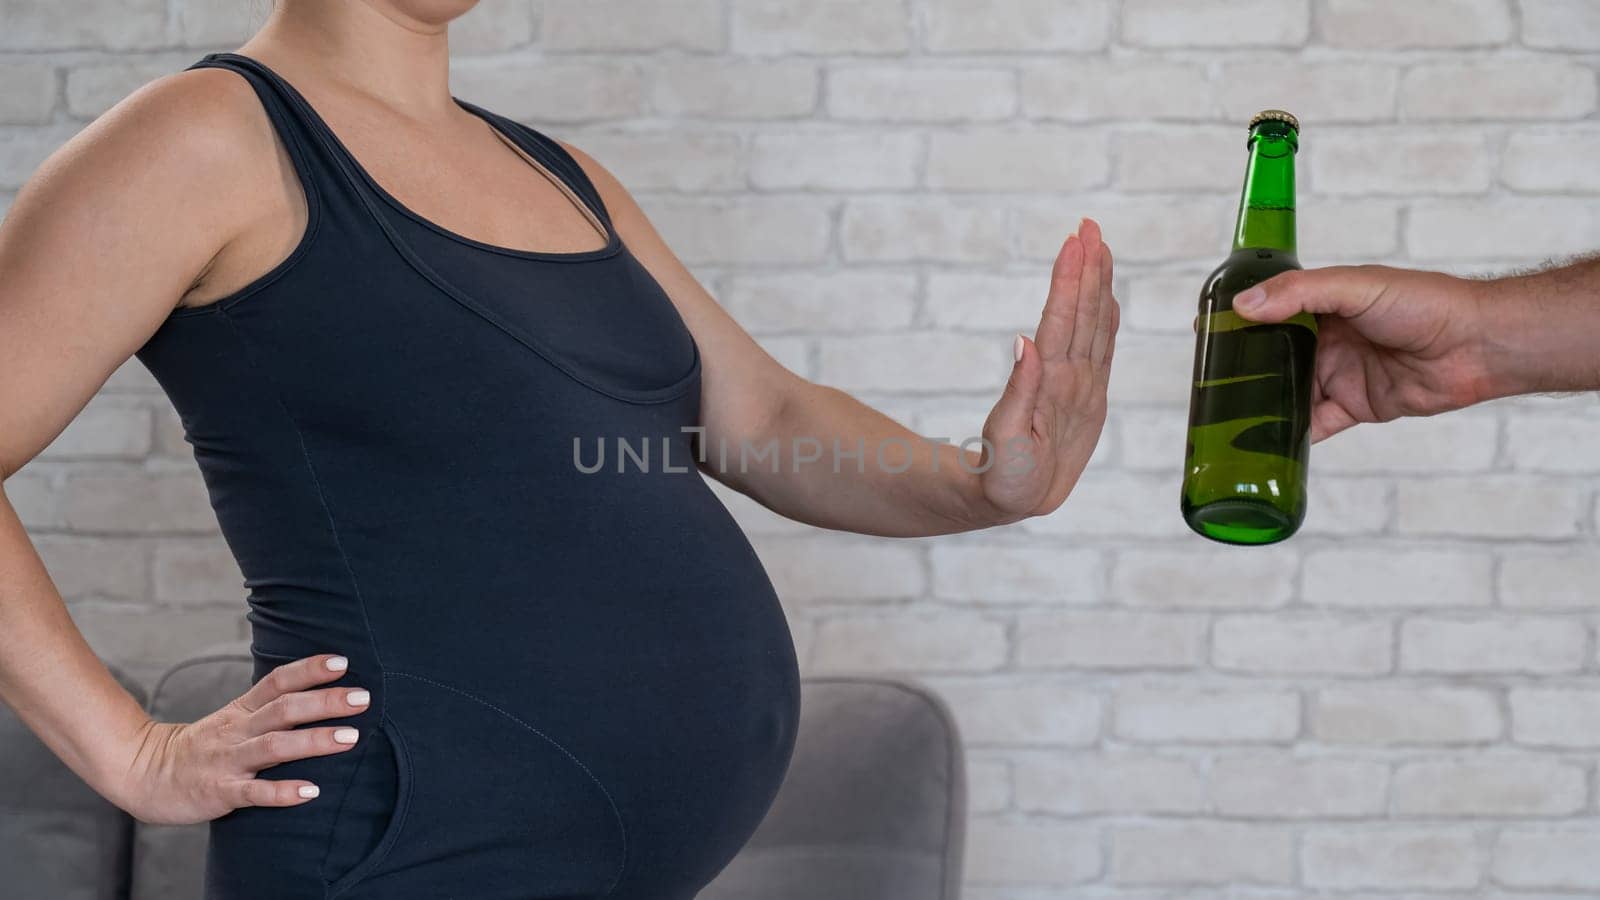 A pregnant woman refuses beer. by mrwed54